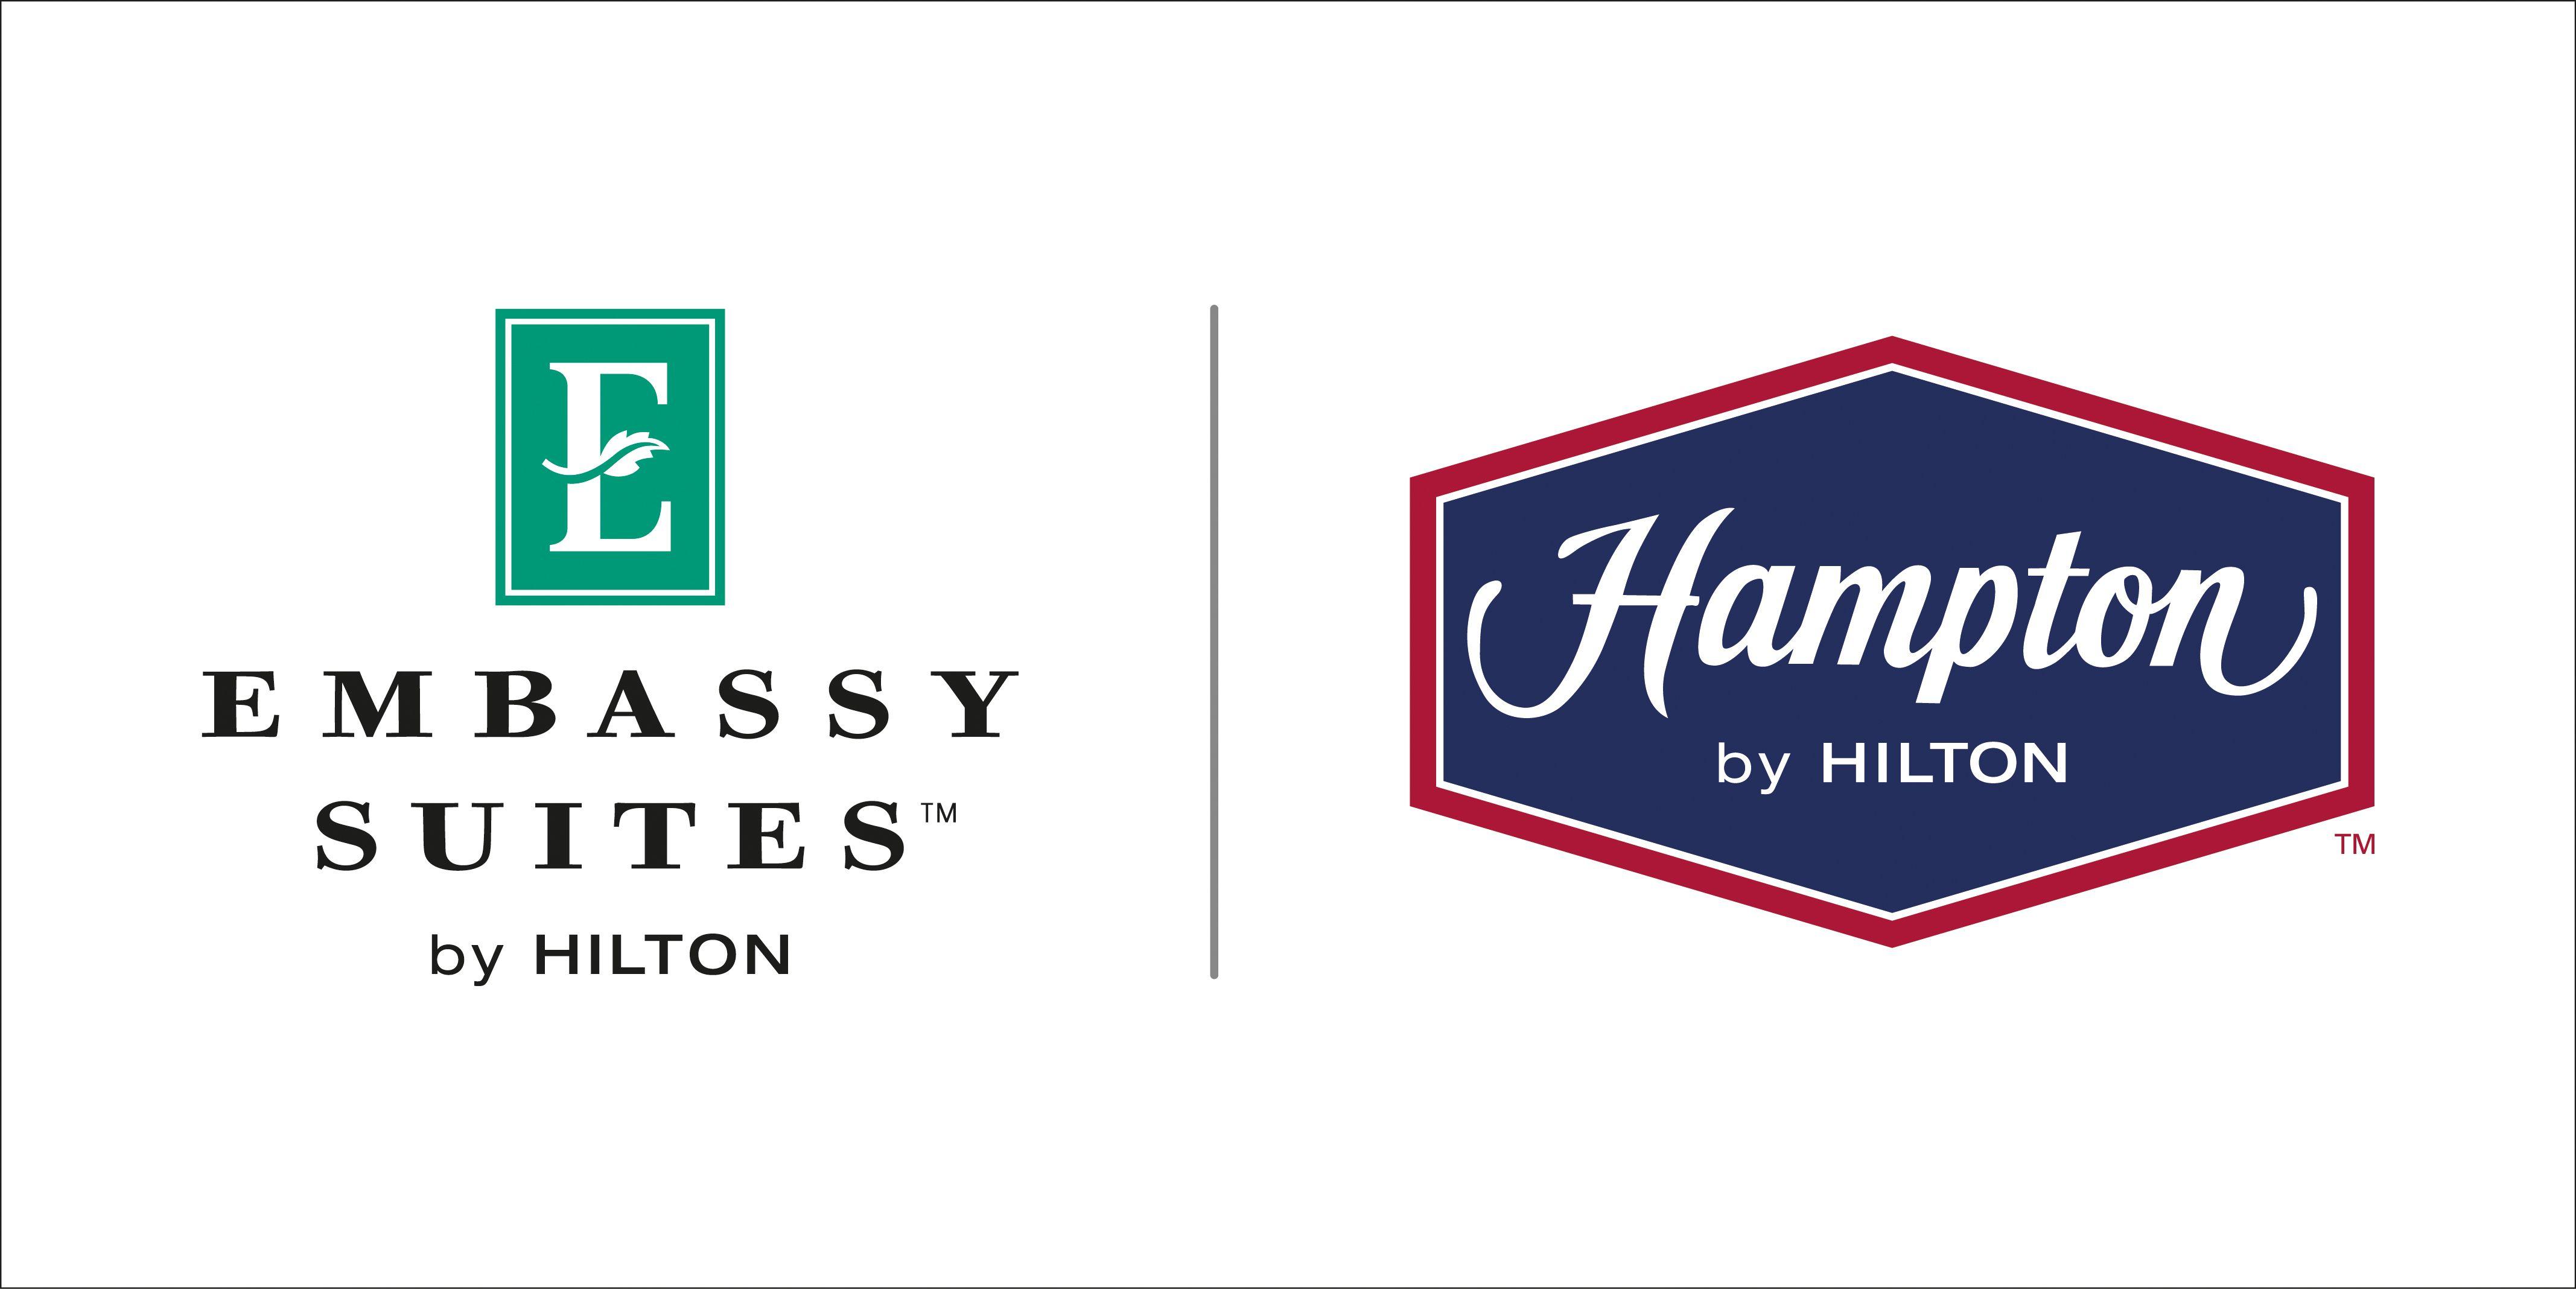 Embassy Suites Logo - Embassy Suites and Hampton Hotels Add “by Hilton” Endorsement to